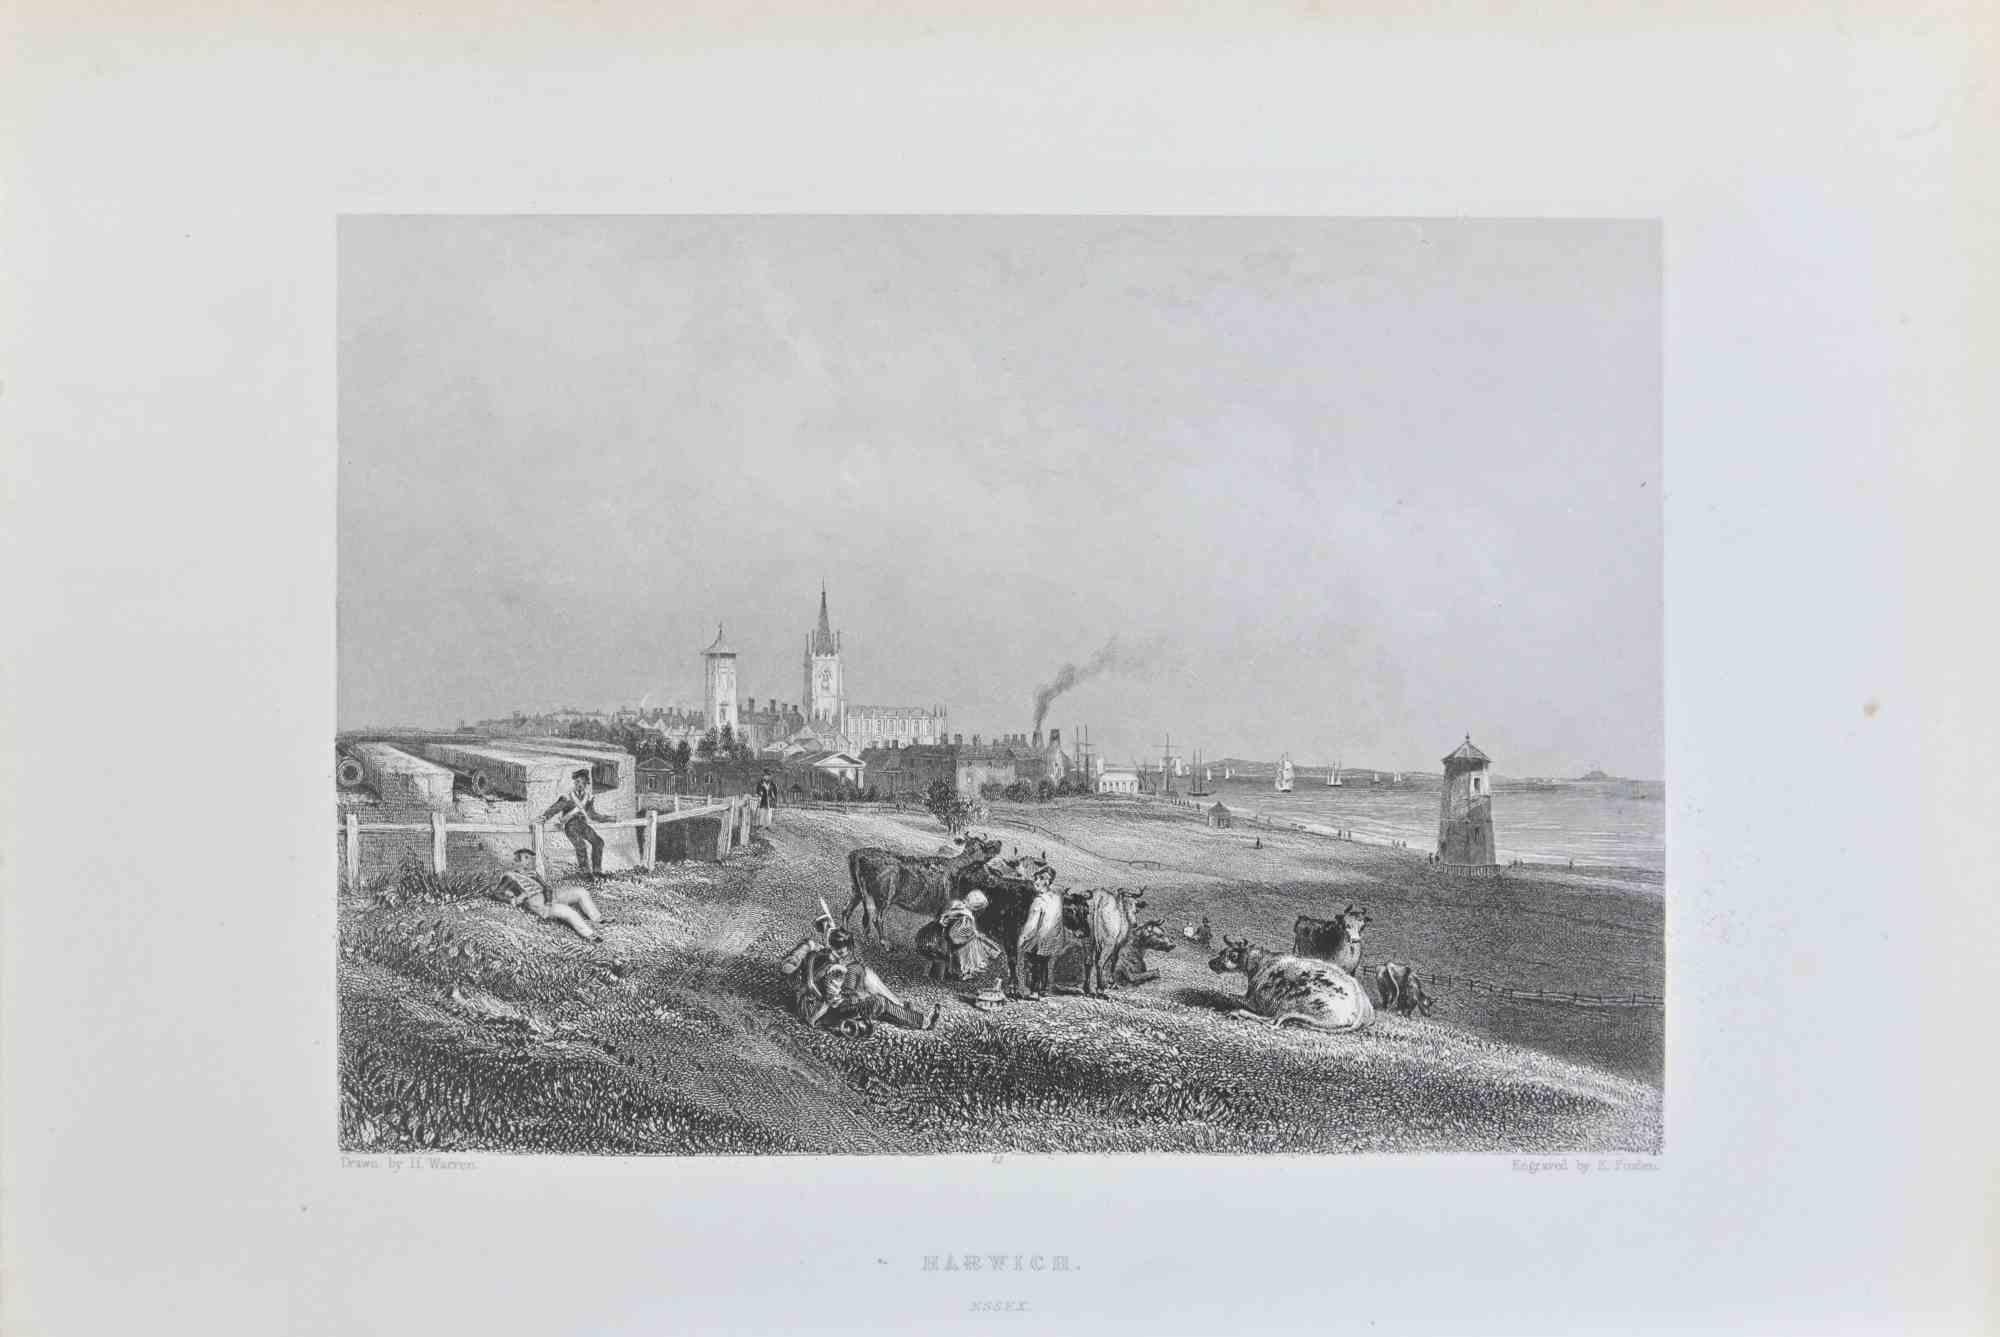 Harwich - Engraving by Edward Francis Finden - 1838